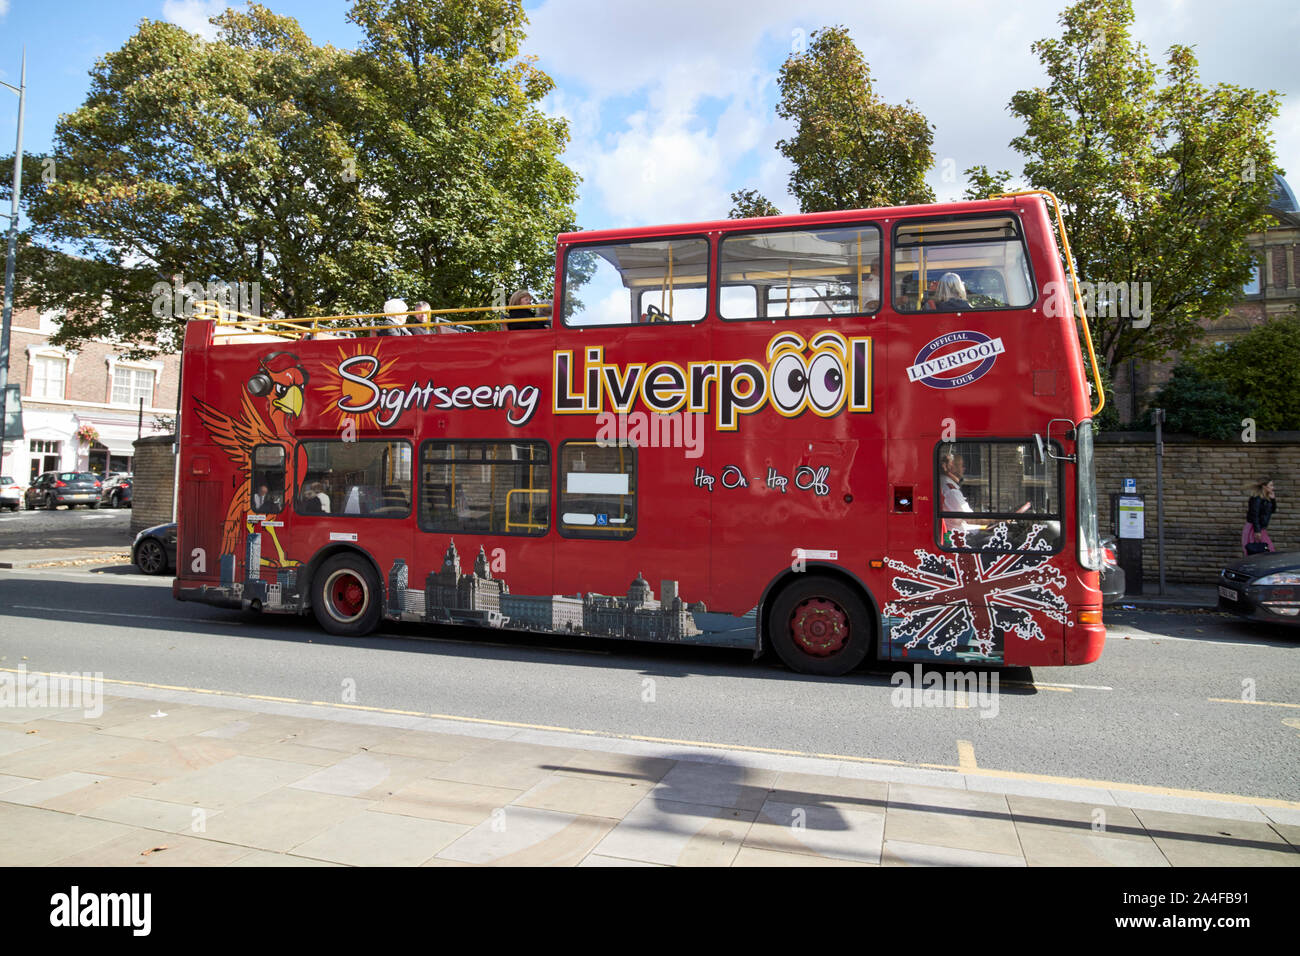 sightseeing liverpool open top double deck guided tour bus Liverpool England UK Stock Photo